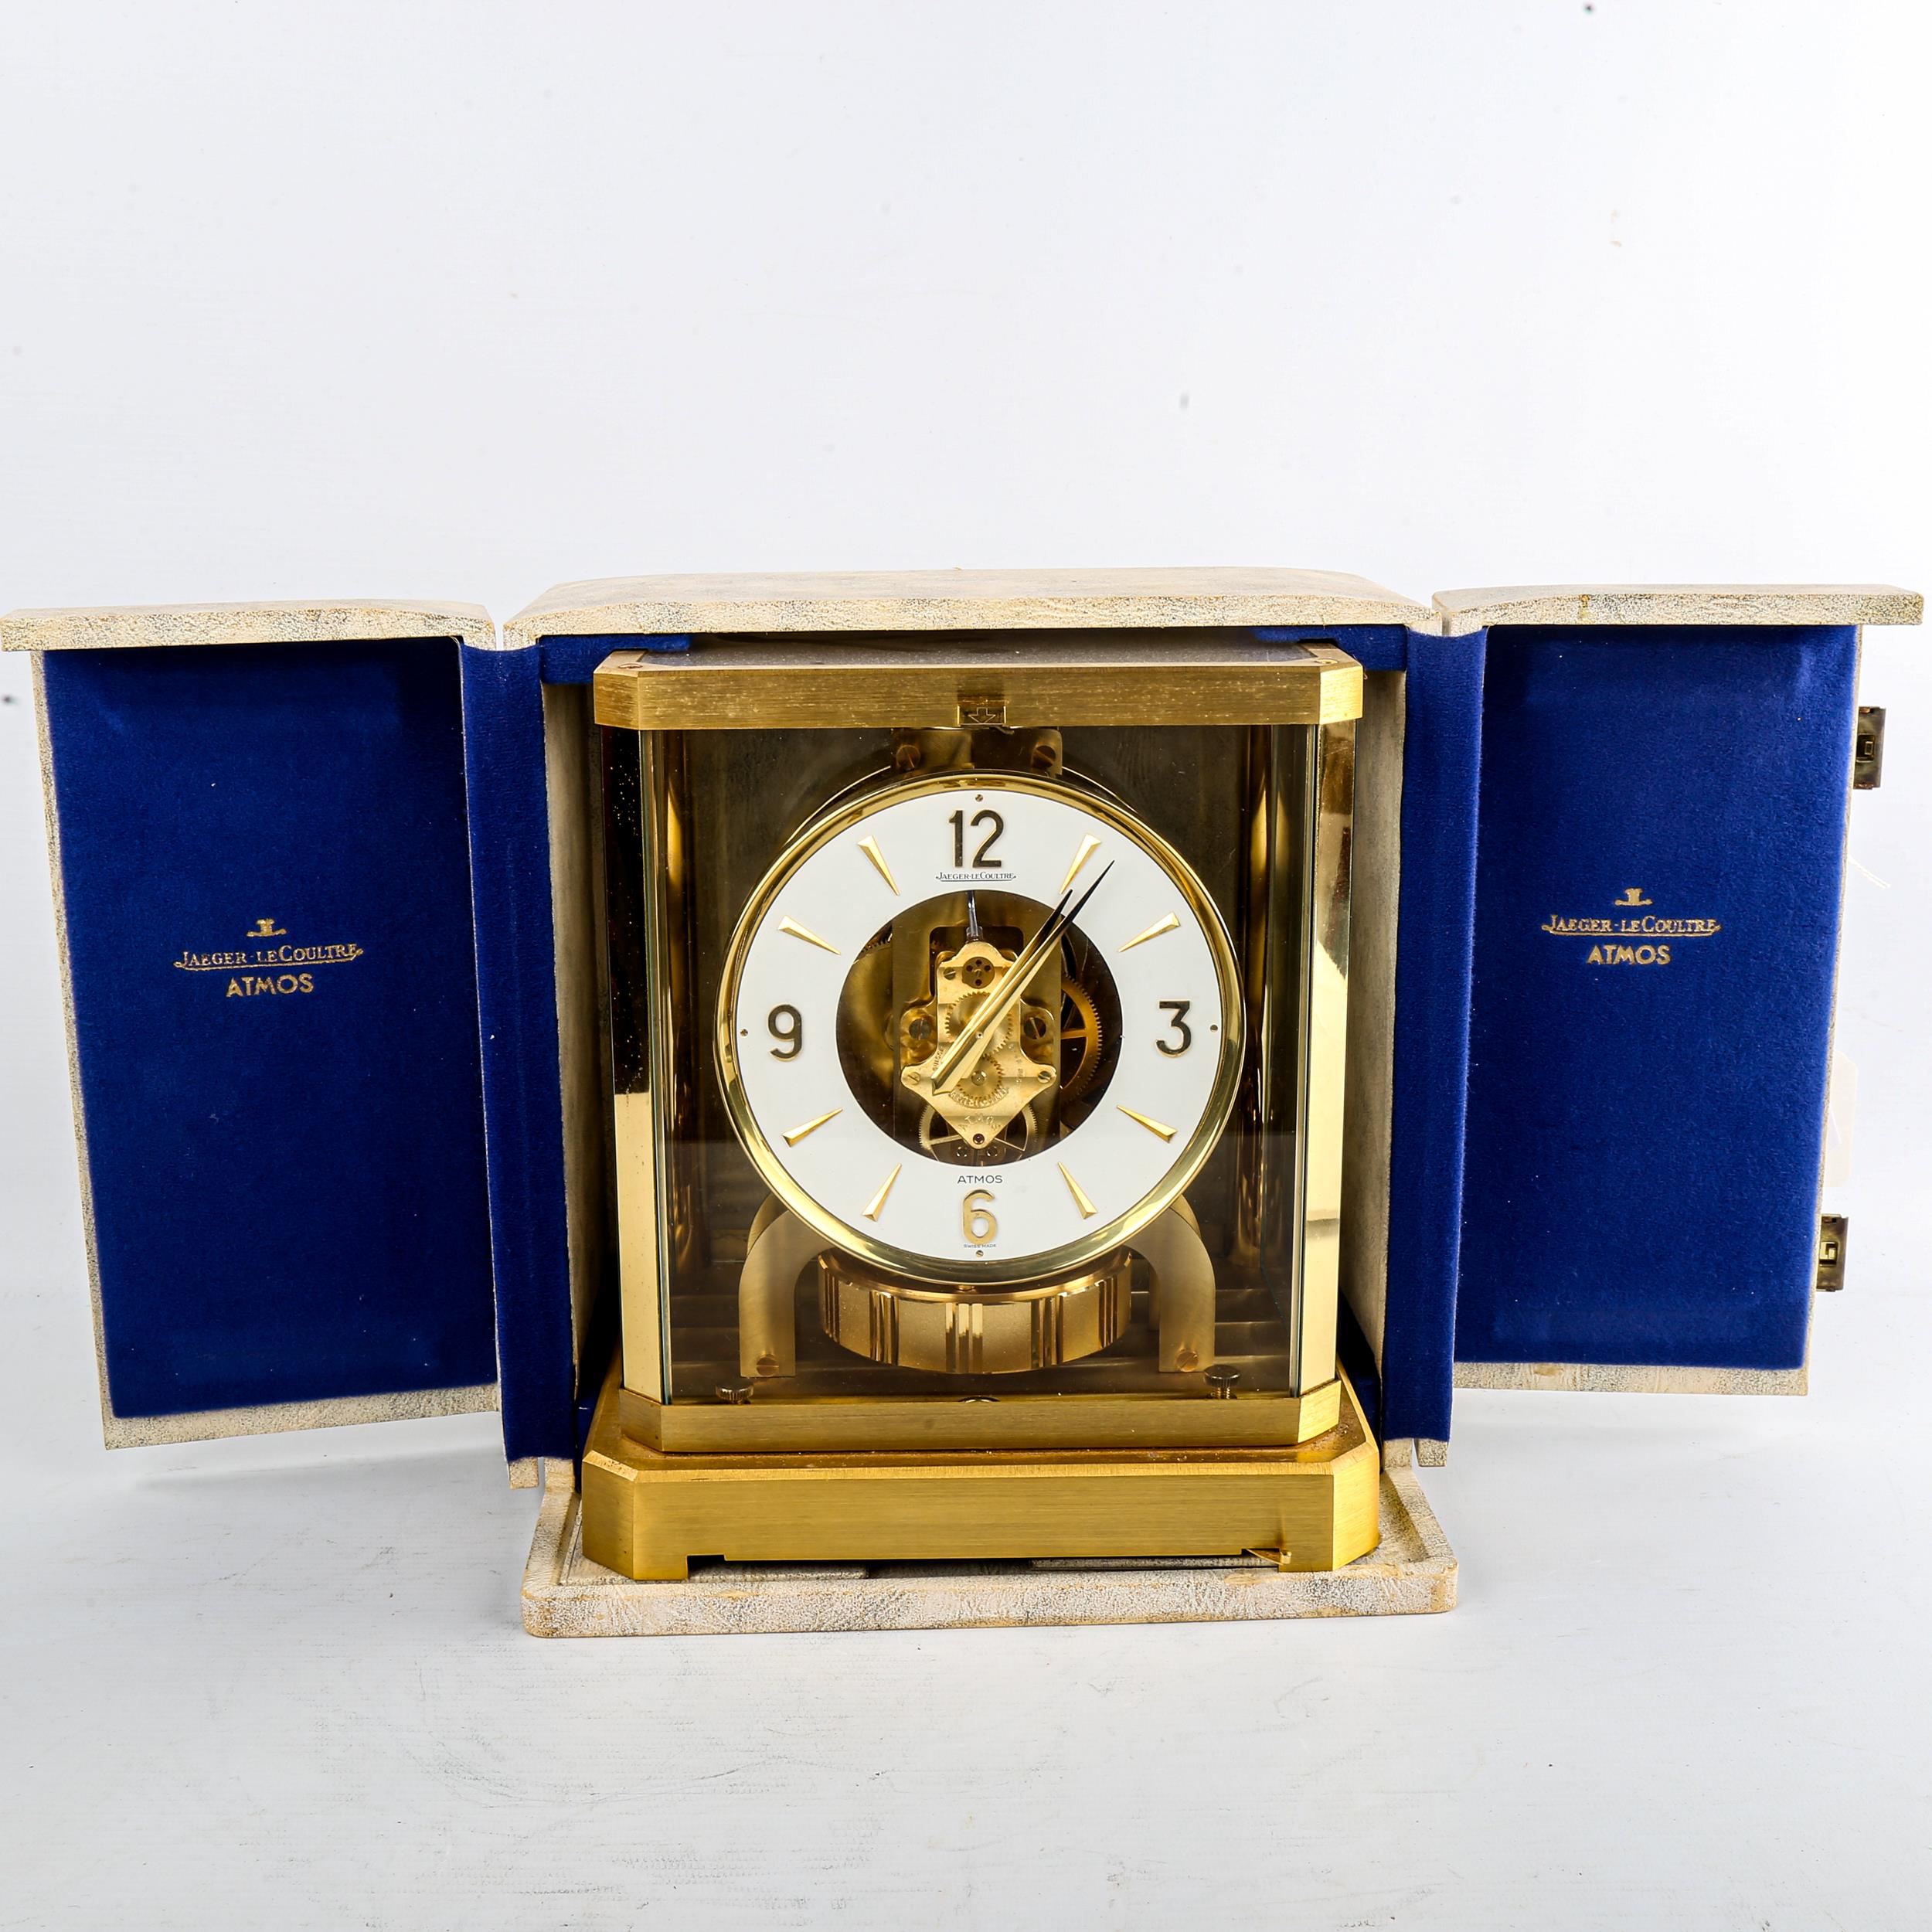 JAEGER LECOULTRE - a Vintage brass-cased Atmos clock, white chapter ring with gilt quarterly